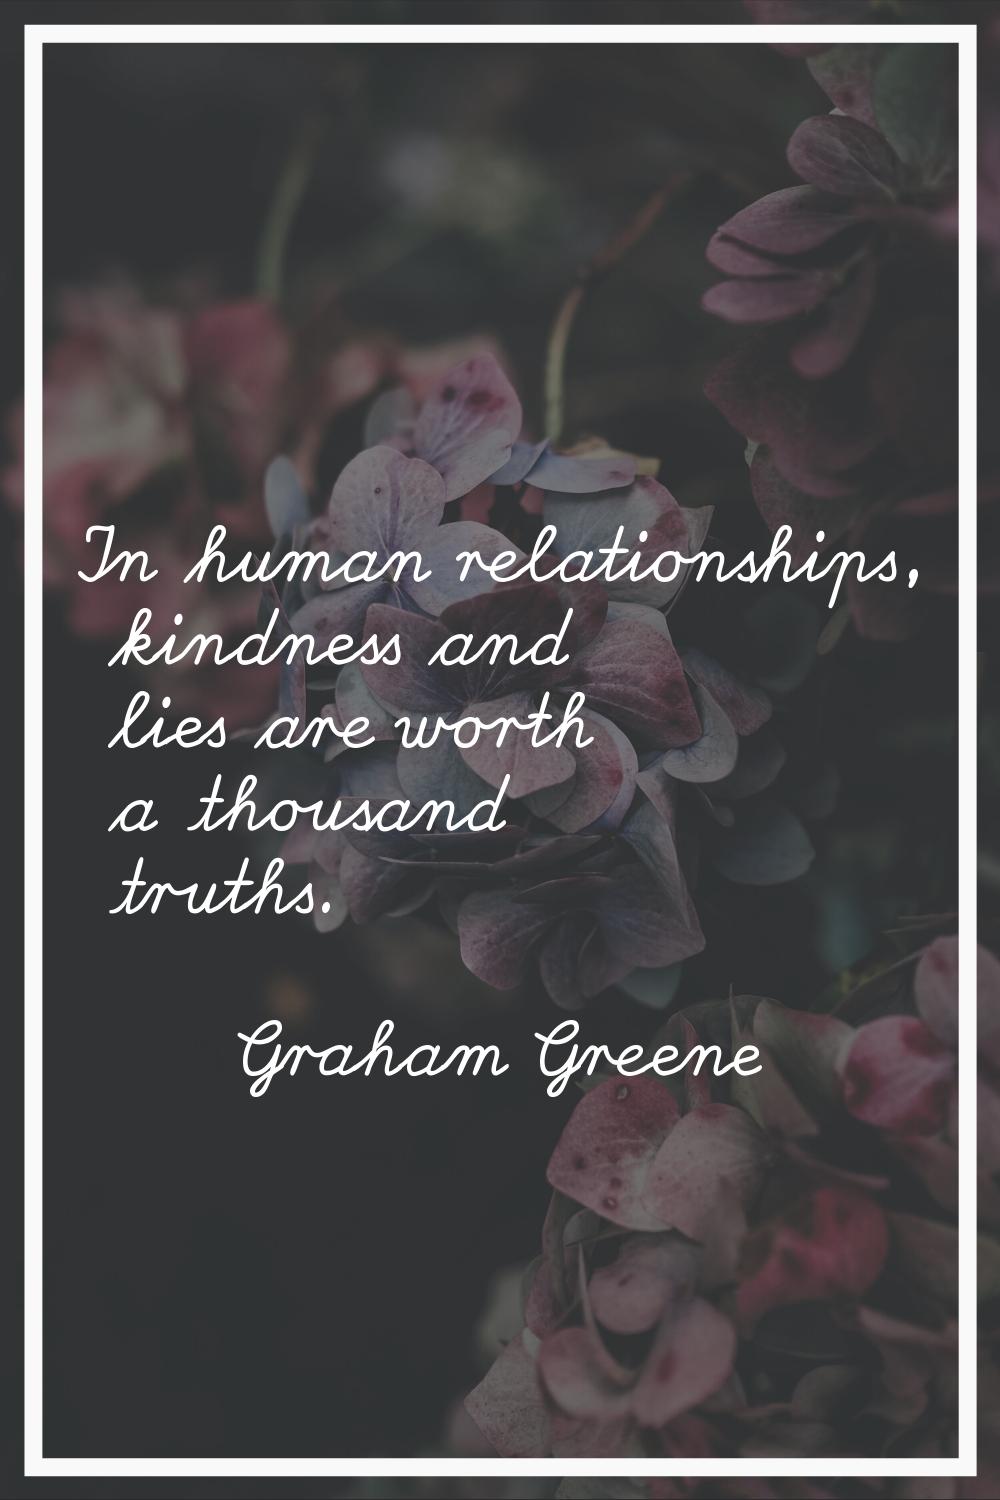 In human relationships, kindness and lies are worth a thousand truths.